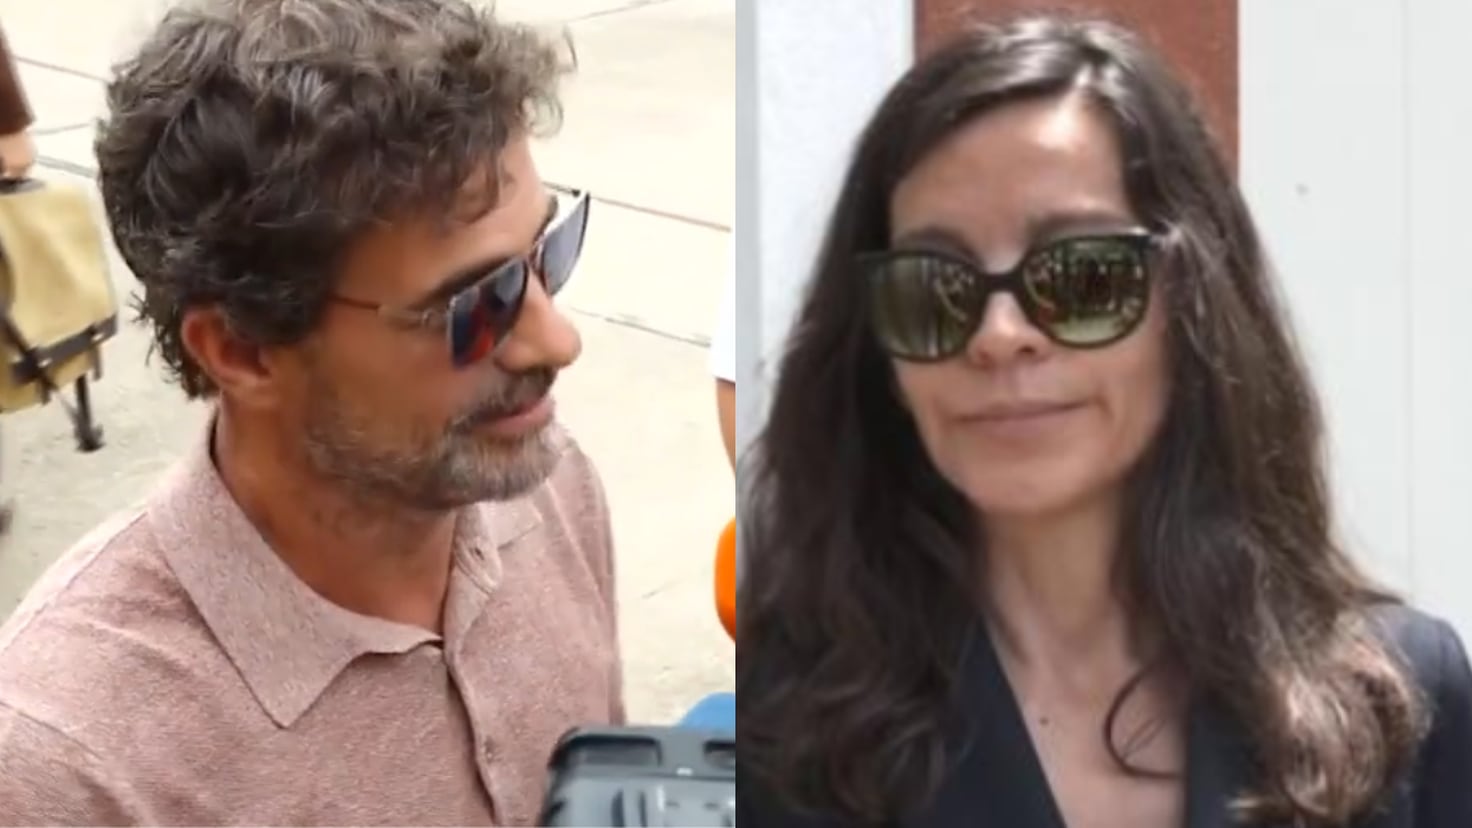 The strong argument between Rodolfo Sancho and Silvia Bronchalo: Their relationship is broken
